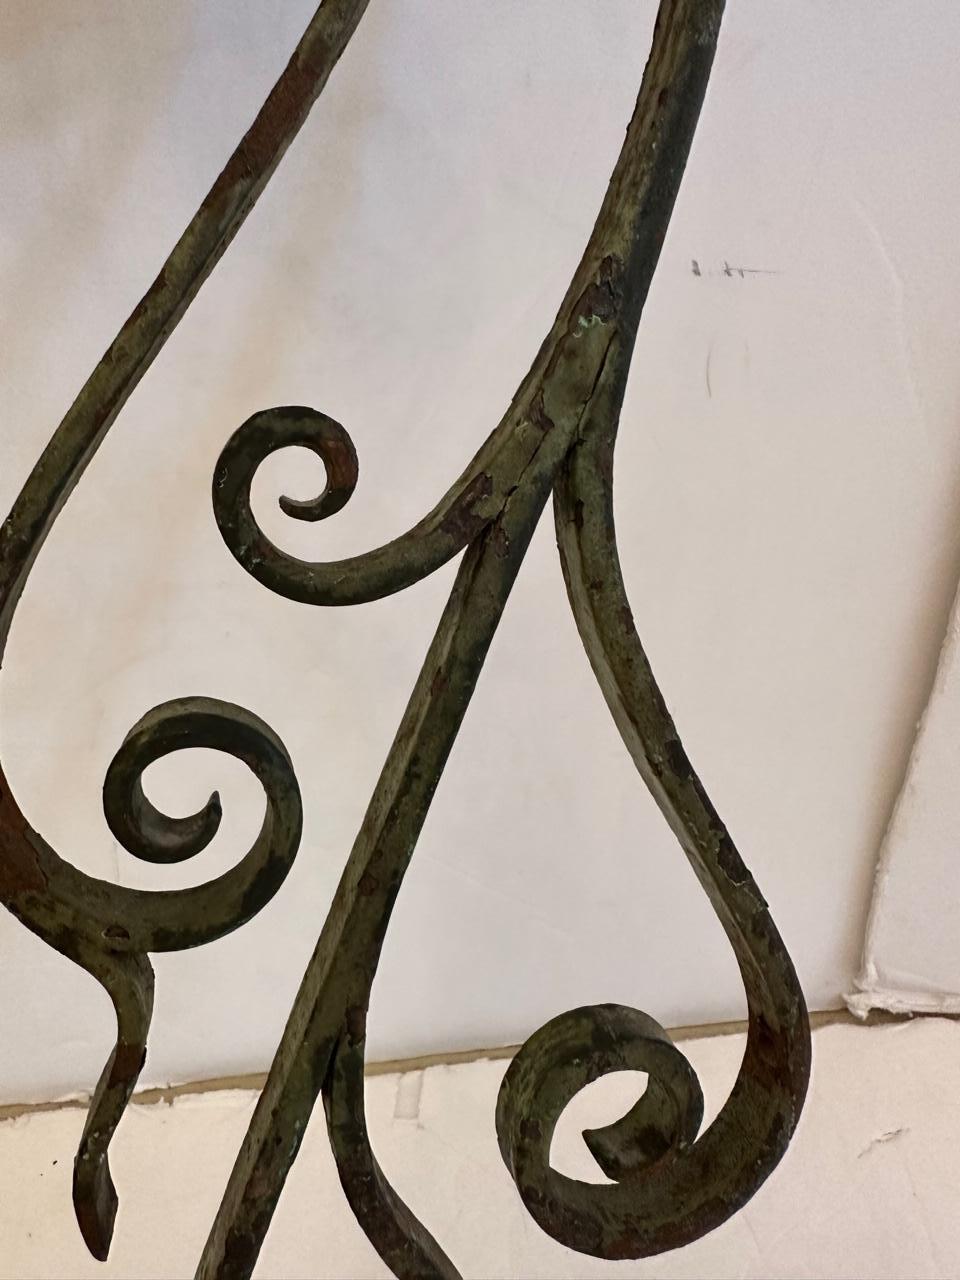 Pair of antique custom aged wrought iron wall sconces having lovely curlicues and shades.
Sconces
35.5” H to top of shade
Shade: 18.5” W at bottom 11” H x 6.5” D
Iron sconce 7.5” W x 25” H